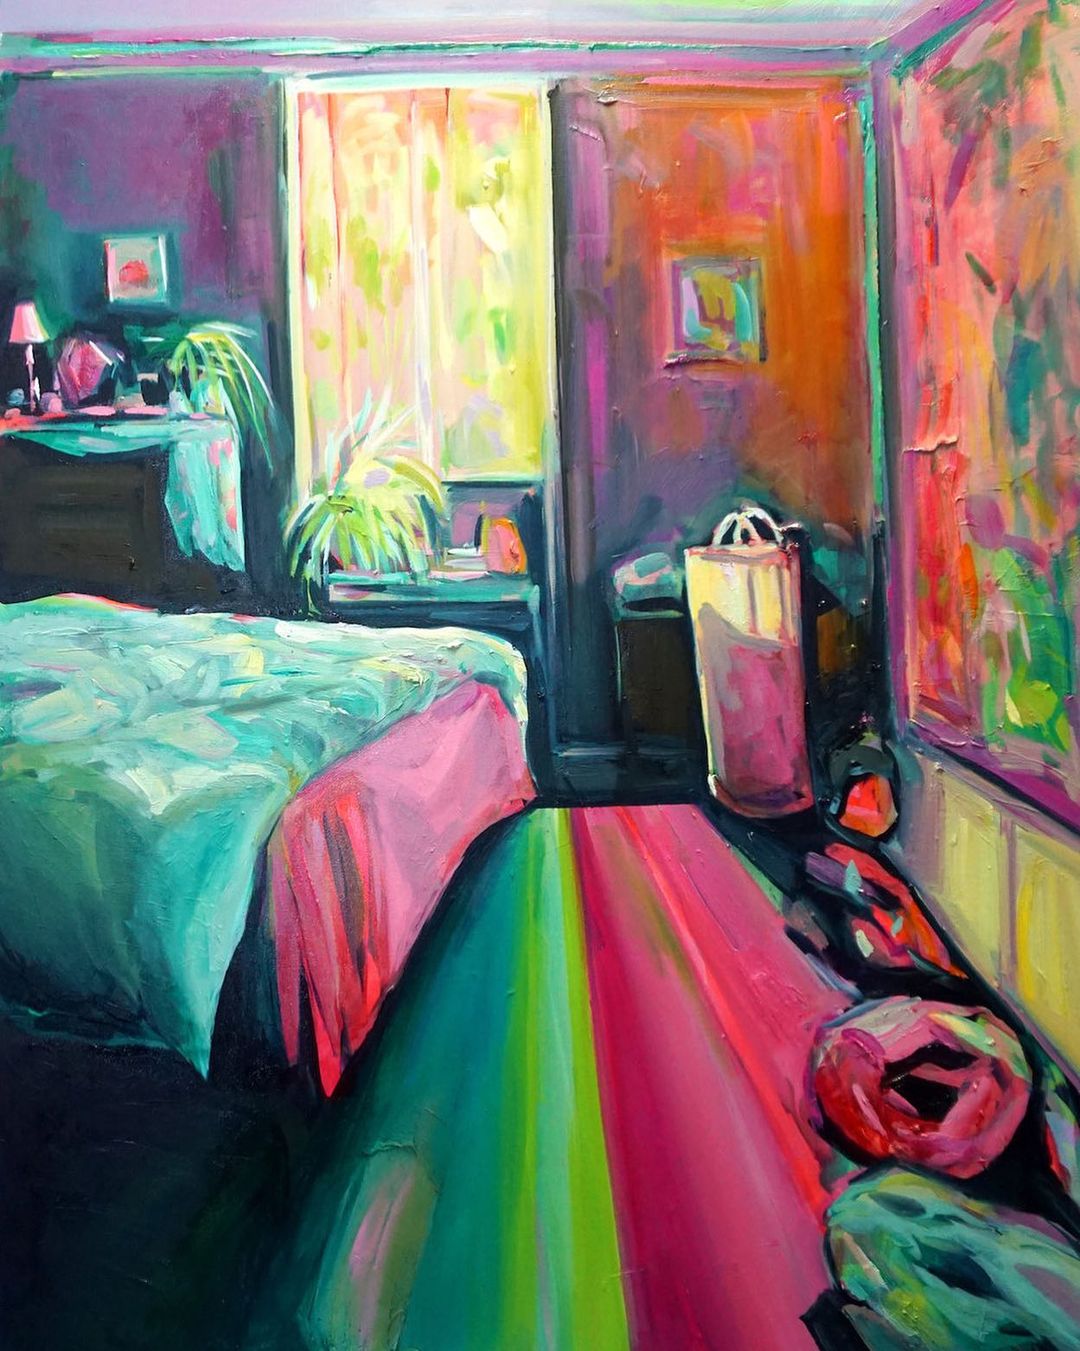 Sublime Paintings Of Intimate Home Spaces By Ekaterina Popova 12